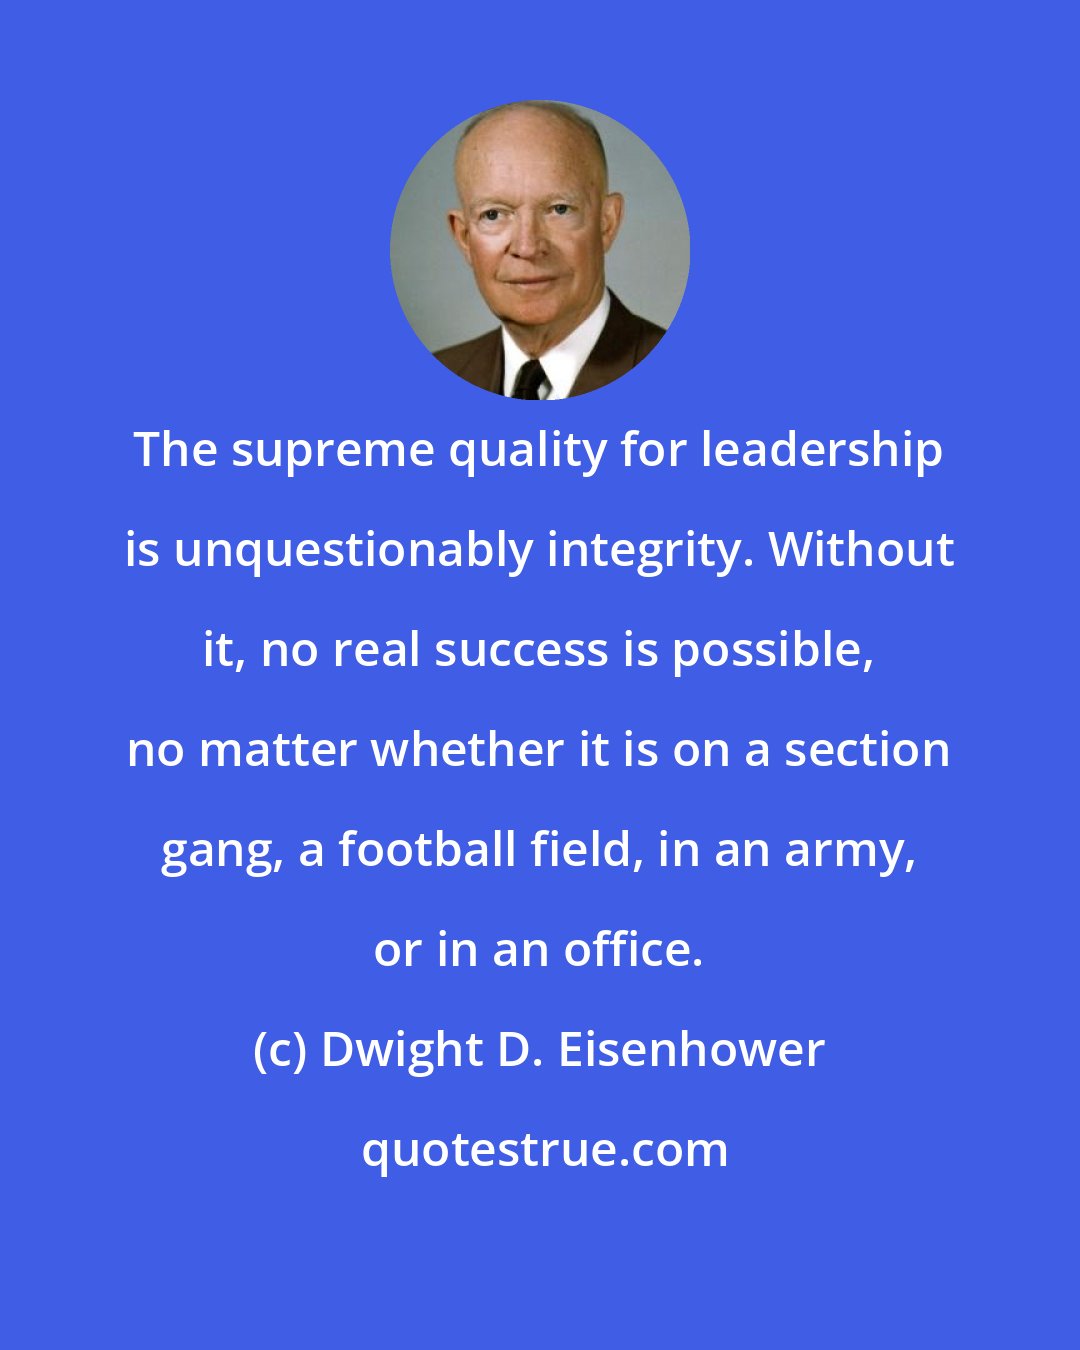 Dwight D. Eisenhower: The supreme quality for leadership is unquestionably integrity. Without it, no real success is possible, no matter whether it is on a section gang, a football field, in an army, or in an office.